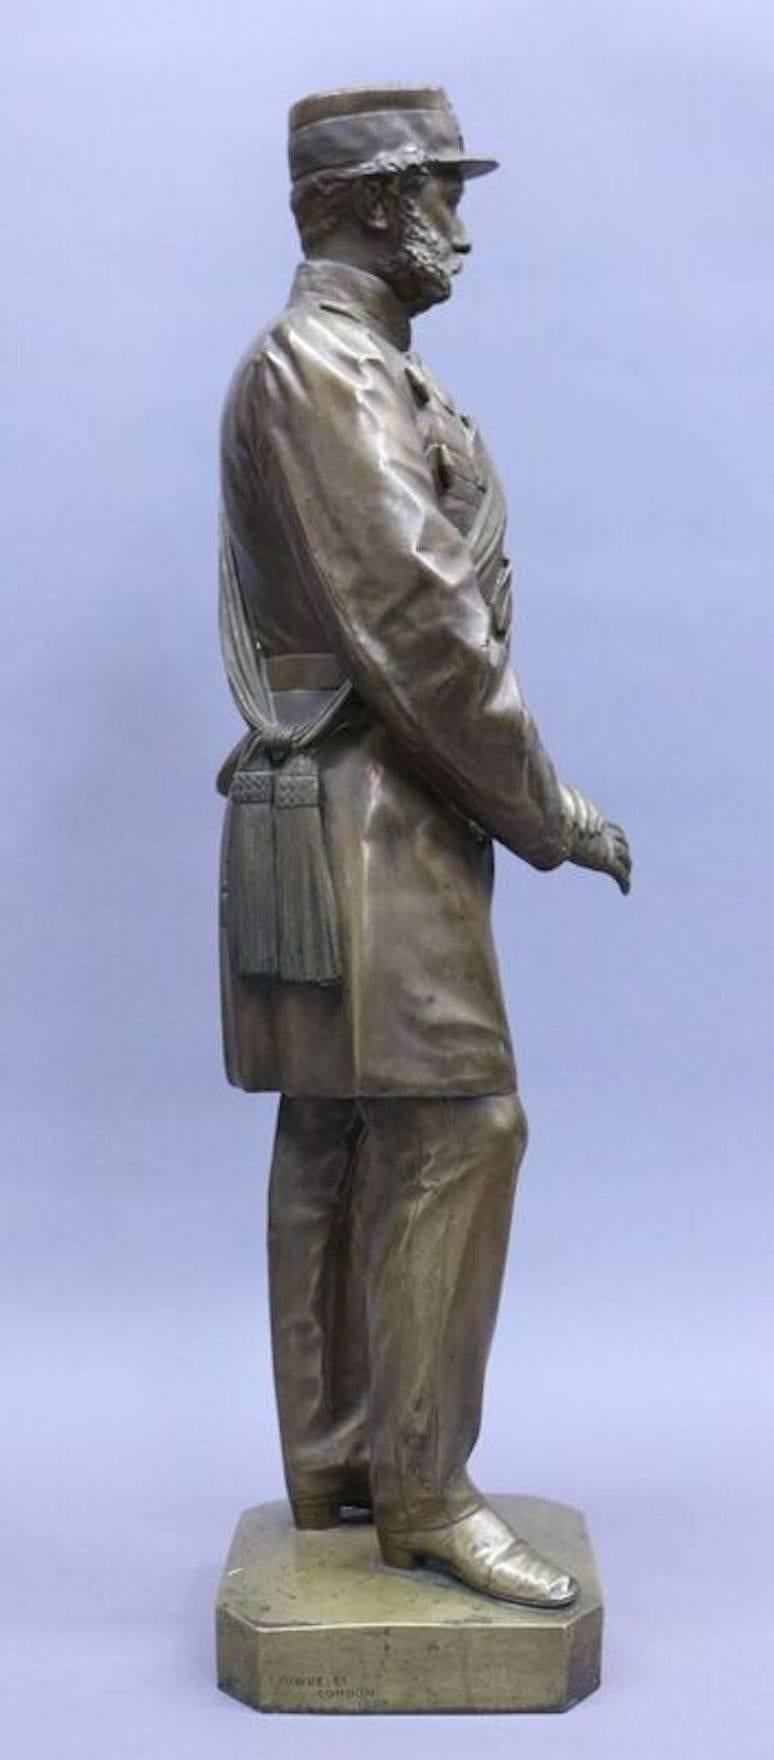 Thomas Fowke 1865 Civil War Era monumental bronze figure features life-like detail. Inscription along base reads "This monumental bronze statue was presented to Captain John P. Field, H.A.C. after his participation in the volunteer movement of